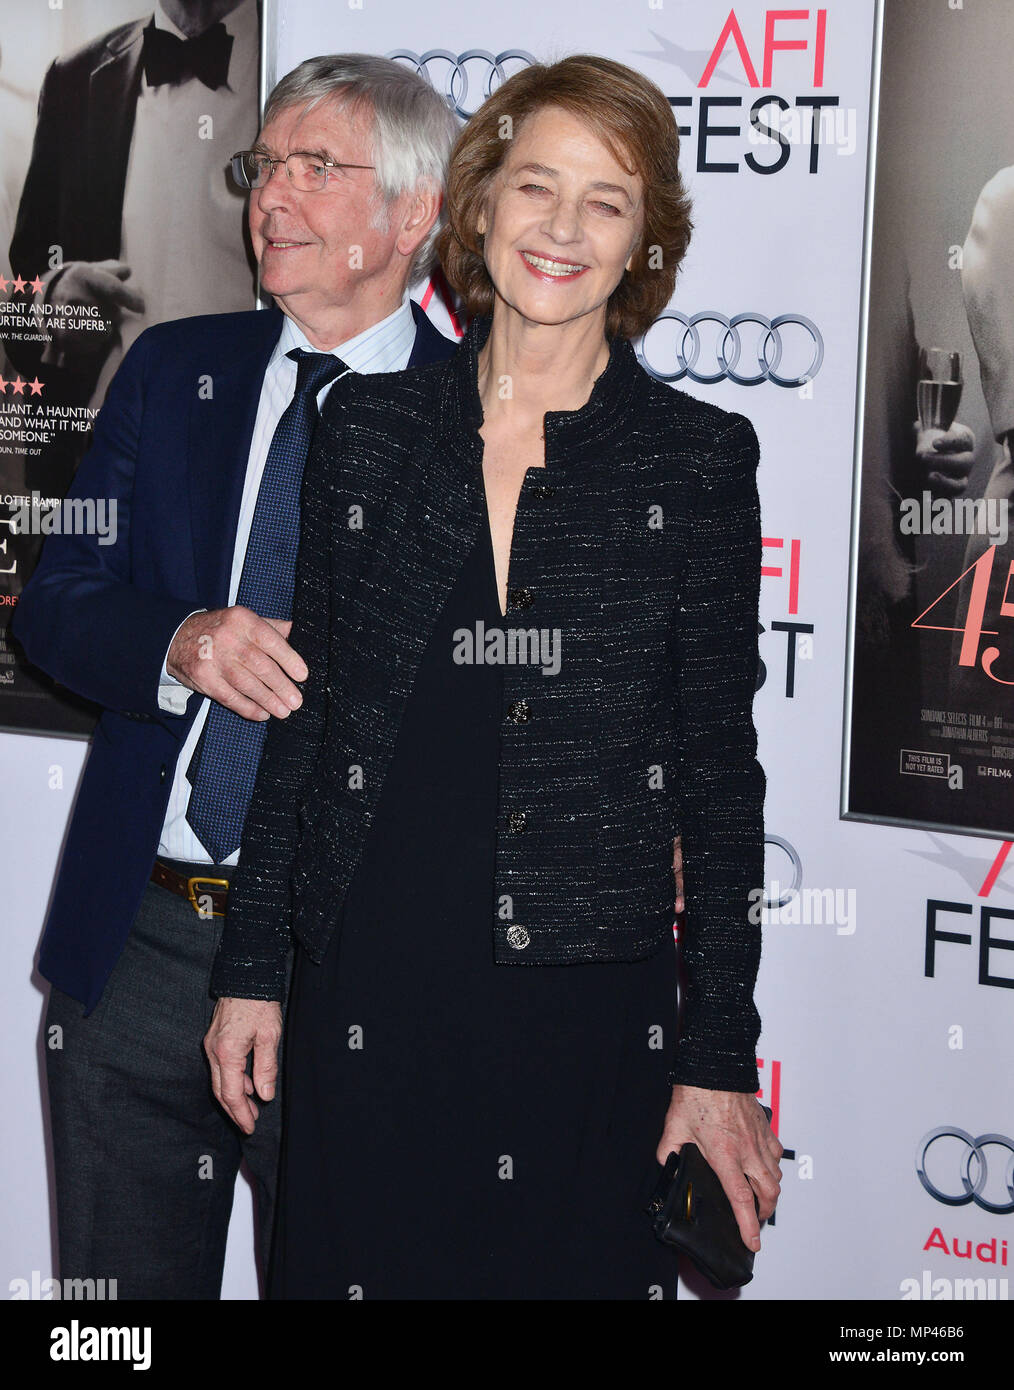 Charlotte Rambling, Tom Courtenay 008 at the Tribute to Charlotte Rampling and Tom Courtenay at the AFI Film Festival, 45 years ,  at the TCL Chinese Theatre in Los Angeles. November 11, 2015.Charlotte Rambling, Tom Courtenay 008 ------------- Red Carpet Event, Vertical, USA, Film Industry, Celebrities,  Photography, Bestof, Arts Culture and Entertainment, Topix Celebrities fashion /  Vertical, Best of, Event in Hollywood Life - California,  Red Carpet and backstage, USA, Film Industry, Celebrities,  movie celebrities, TV celebrities, Music celebrities, Photography, Bestof, Arts Culture and En Stock Photo